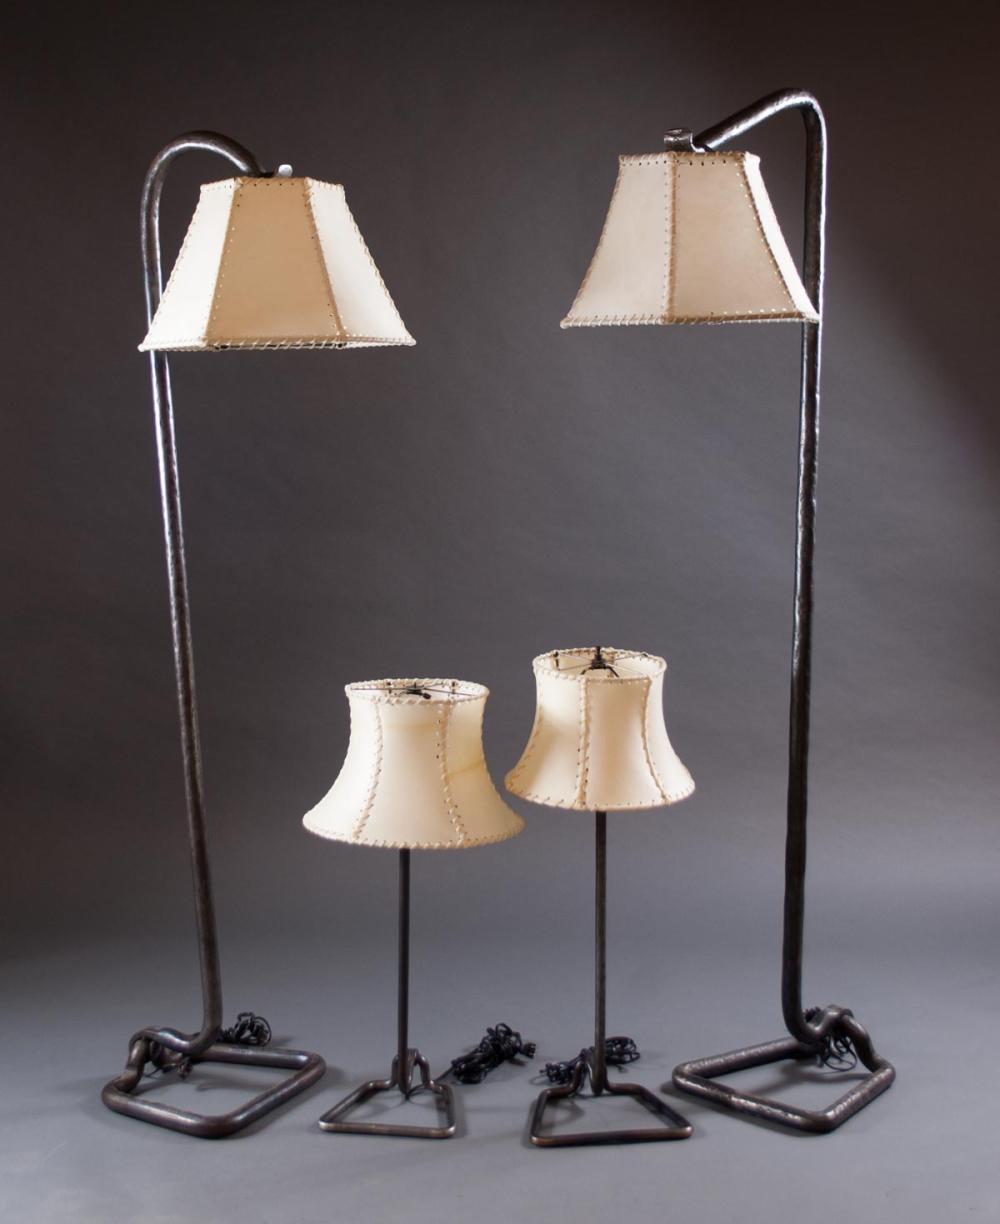 FOUR TIMBERLINE LODGE LAMPS ATTRIBUTED 3162dd